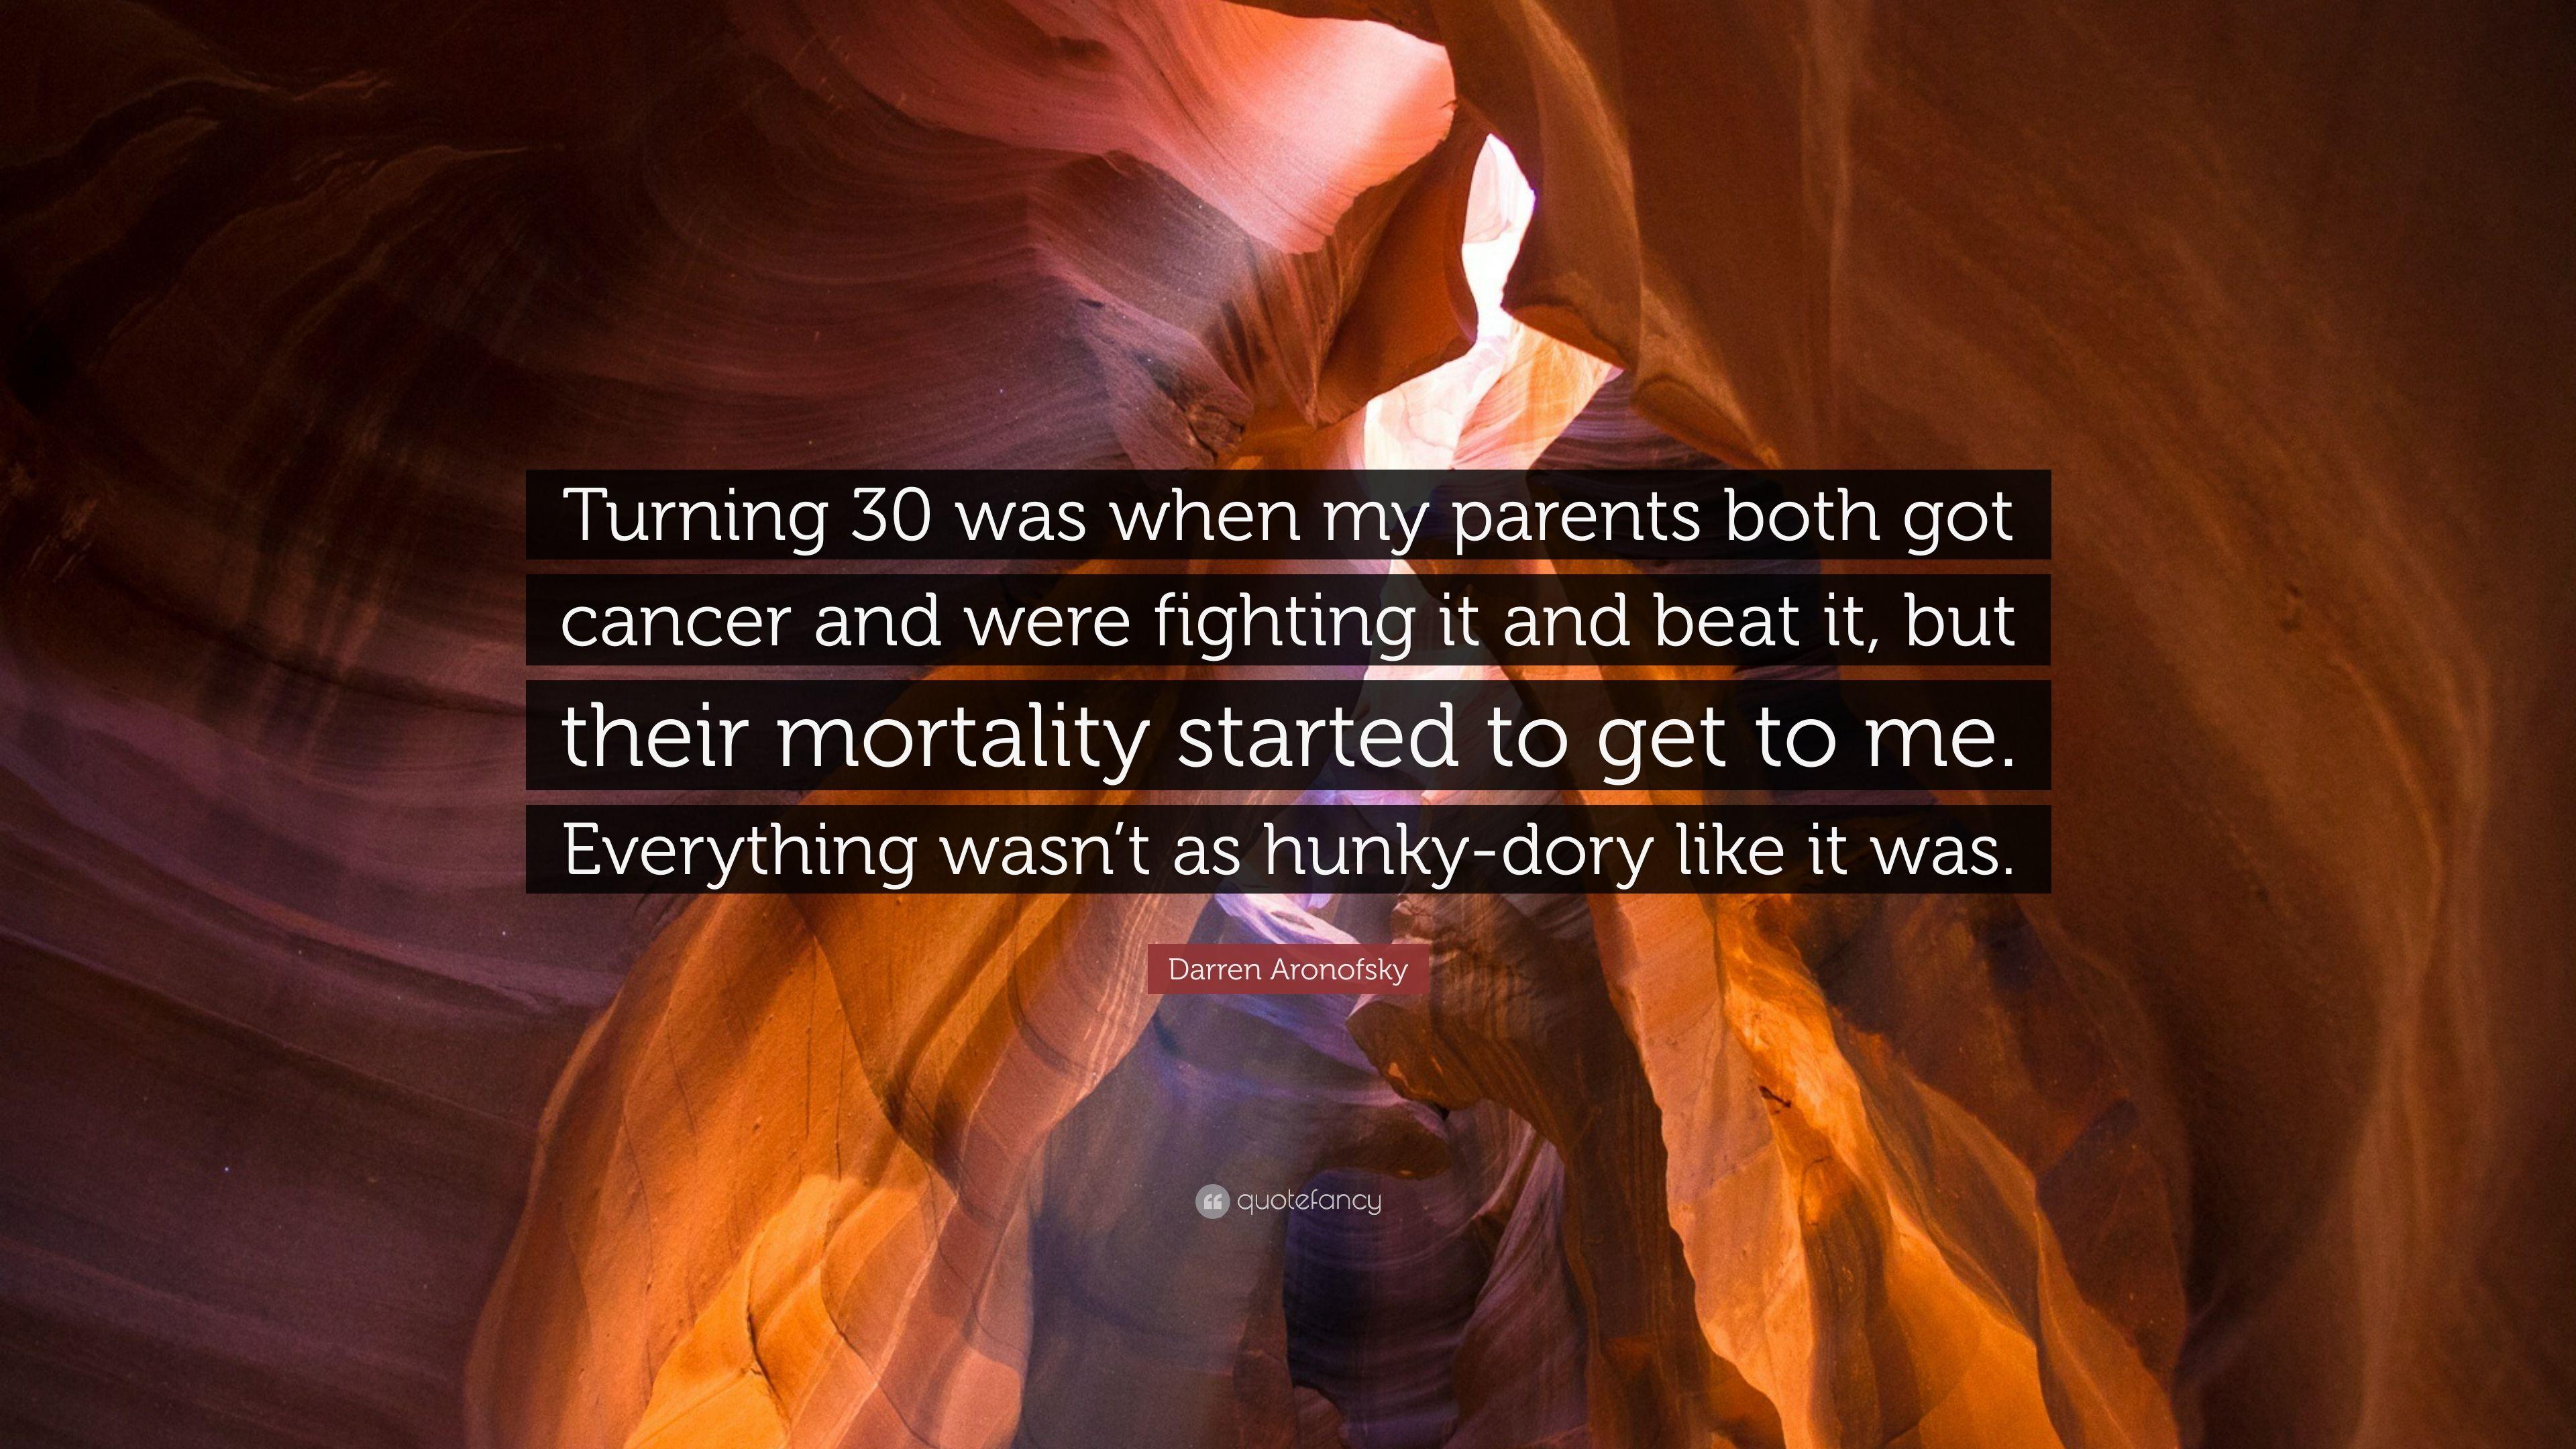 Darren Aronofsky Quote: “Turning 30 was when my parents both got